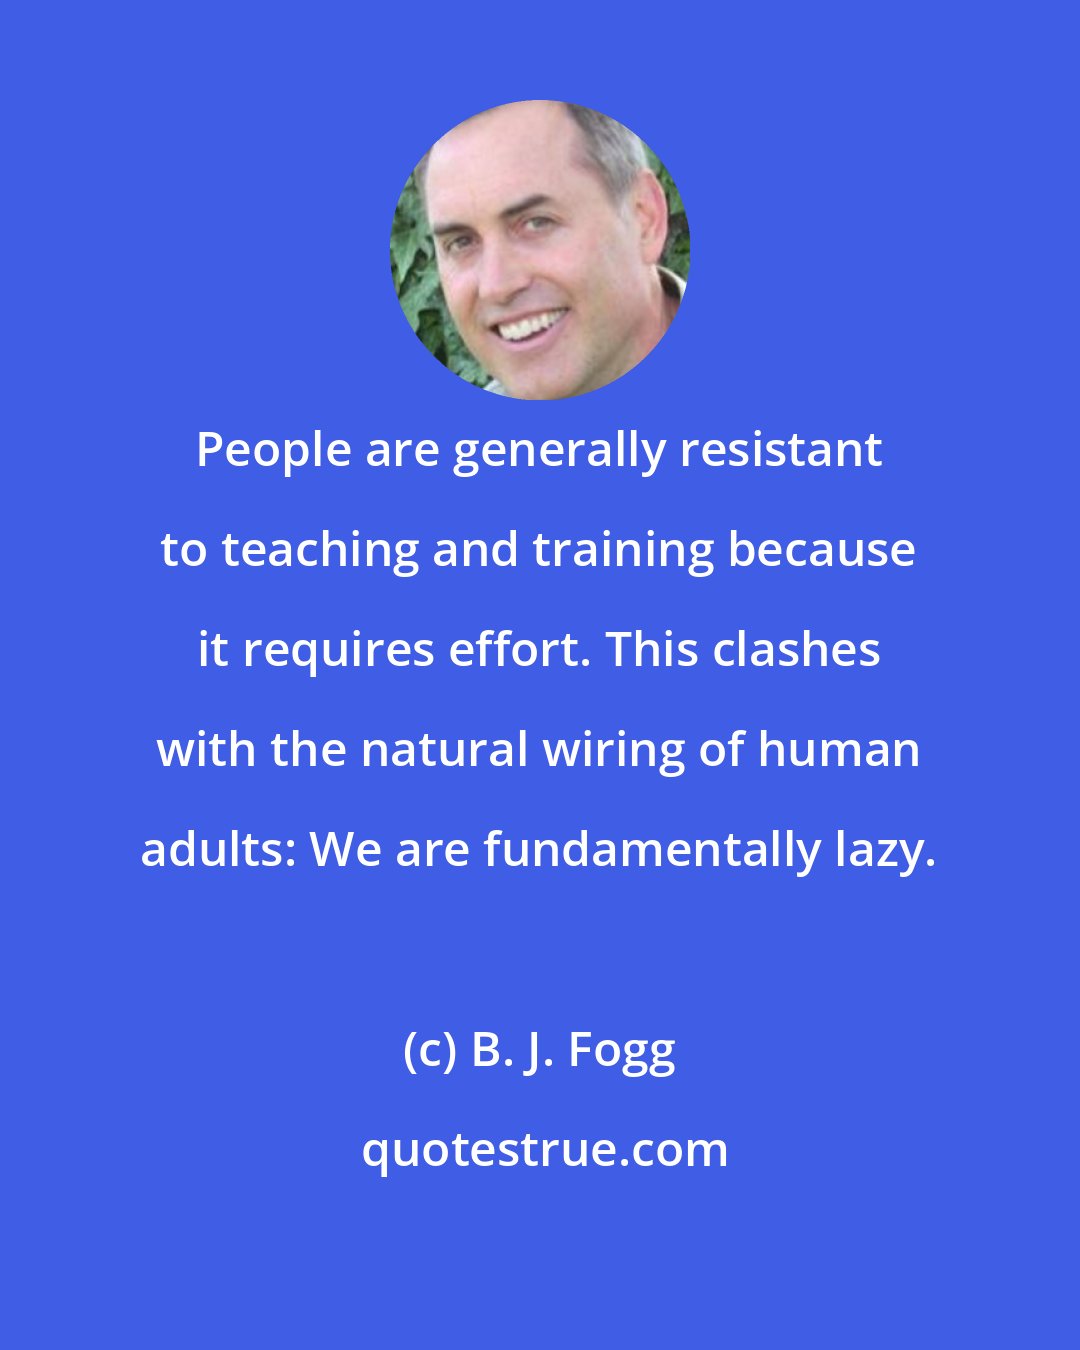 B. J. Fogg: People are generally resistant to teaching and training because it requires effort. This clashes with the natural wiring of human adults: We are fundamentally lazy.